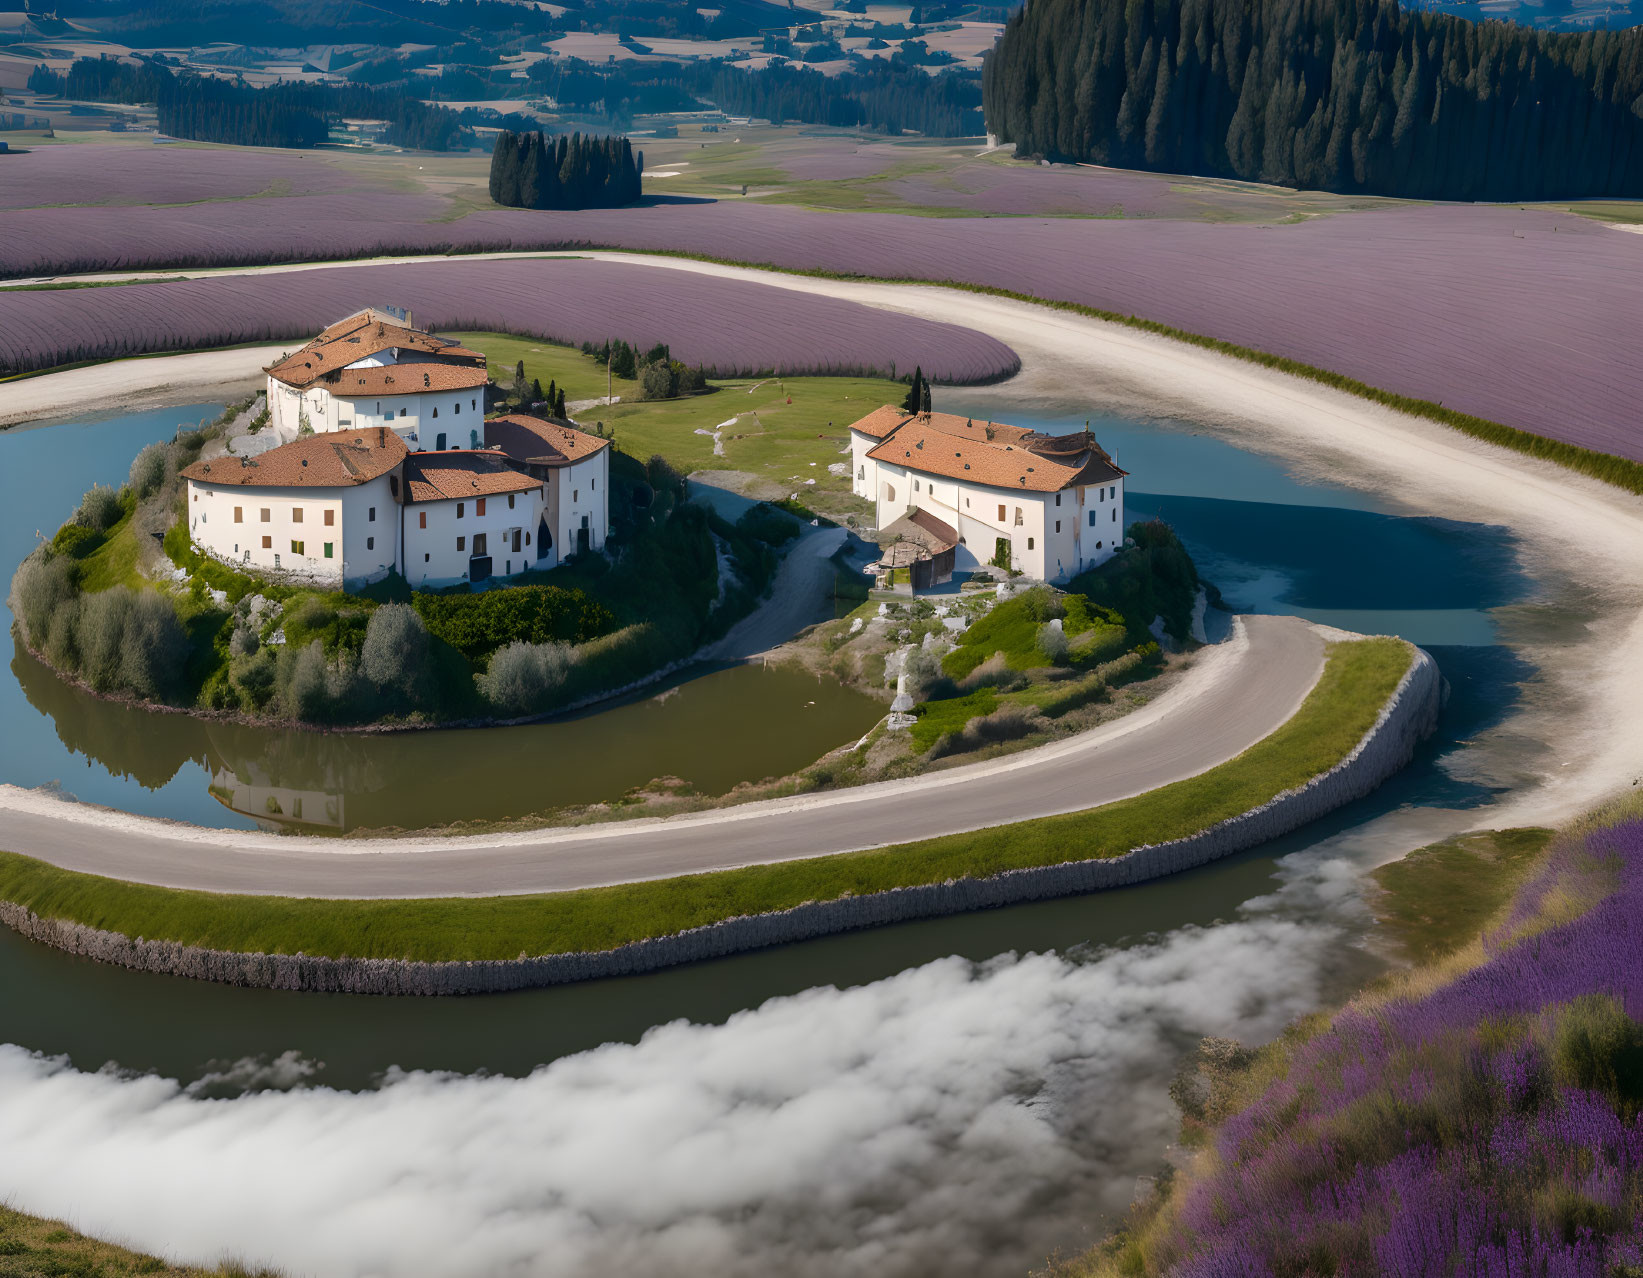 Historical buildings and lavender fields by winding river